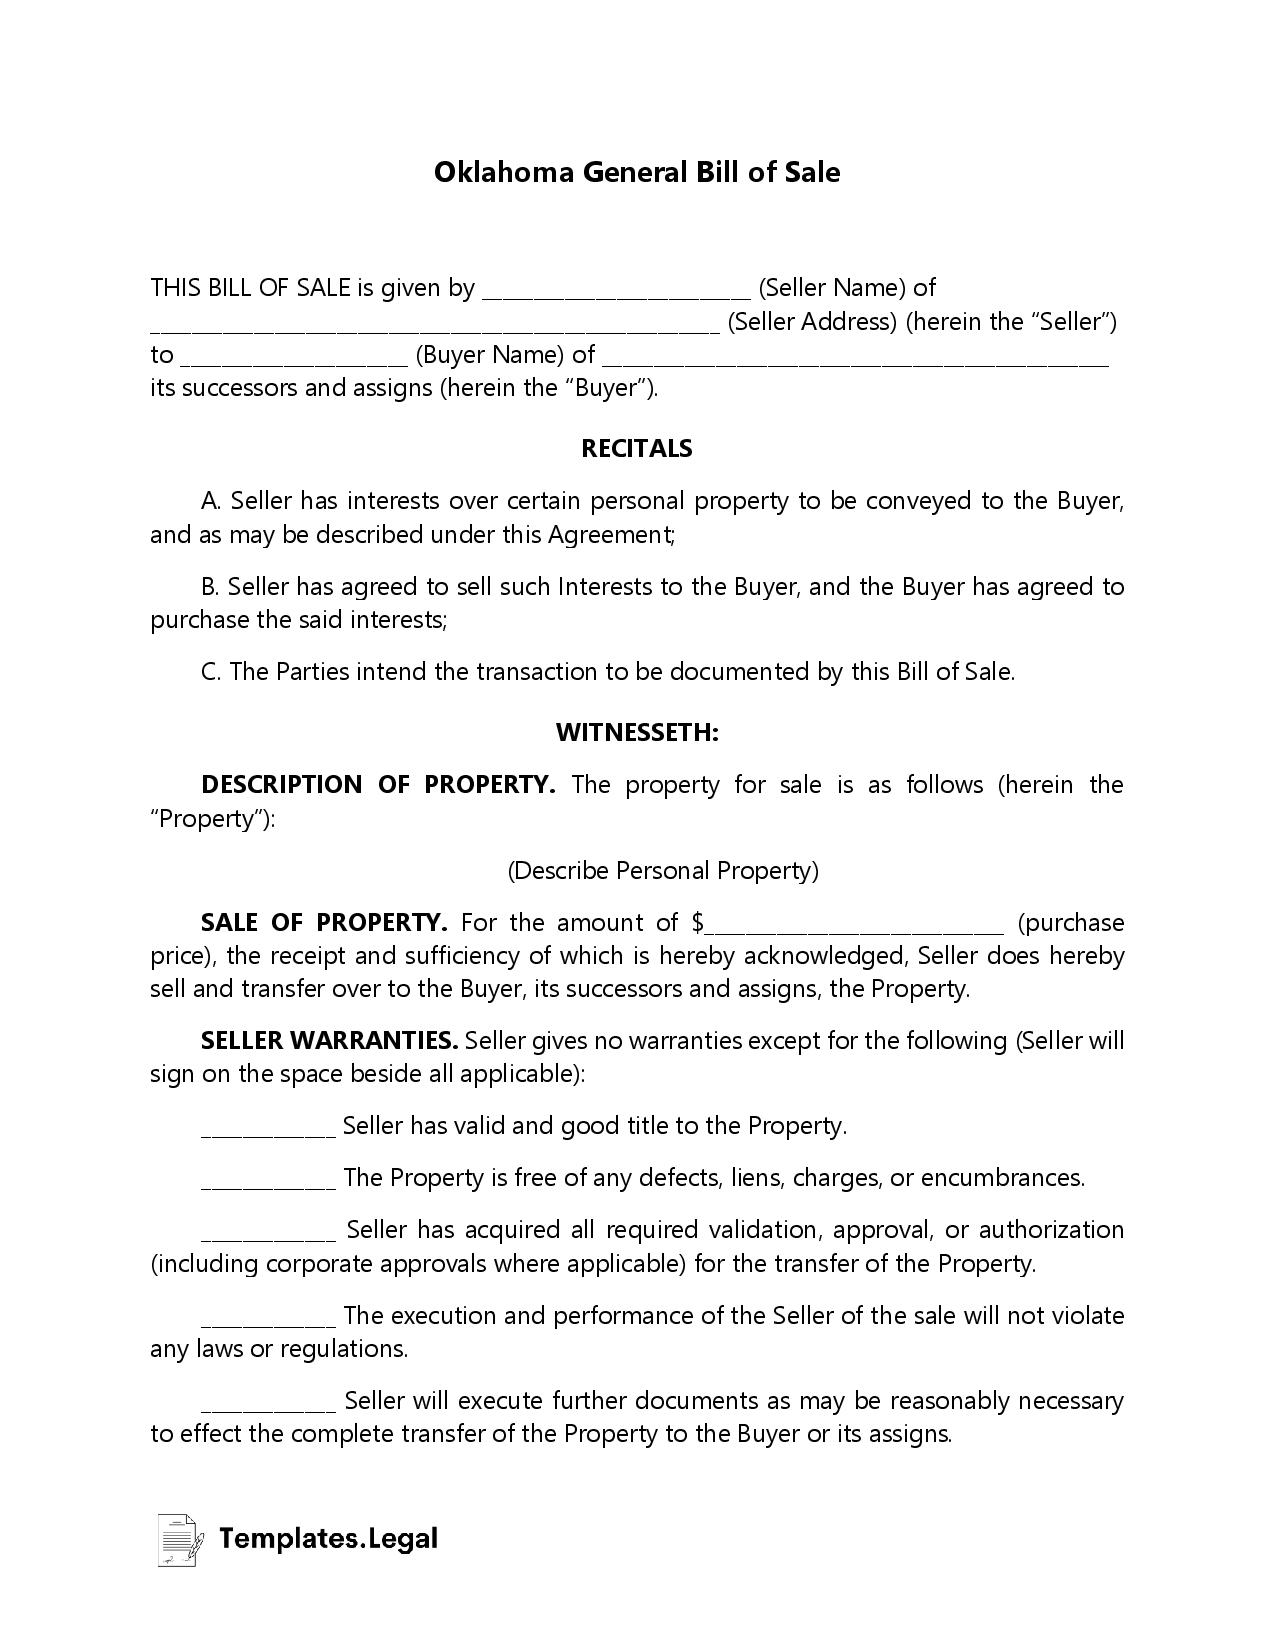 Oklahoma General Bill of Sale - Templates.Legal